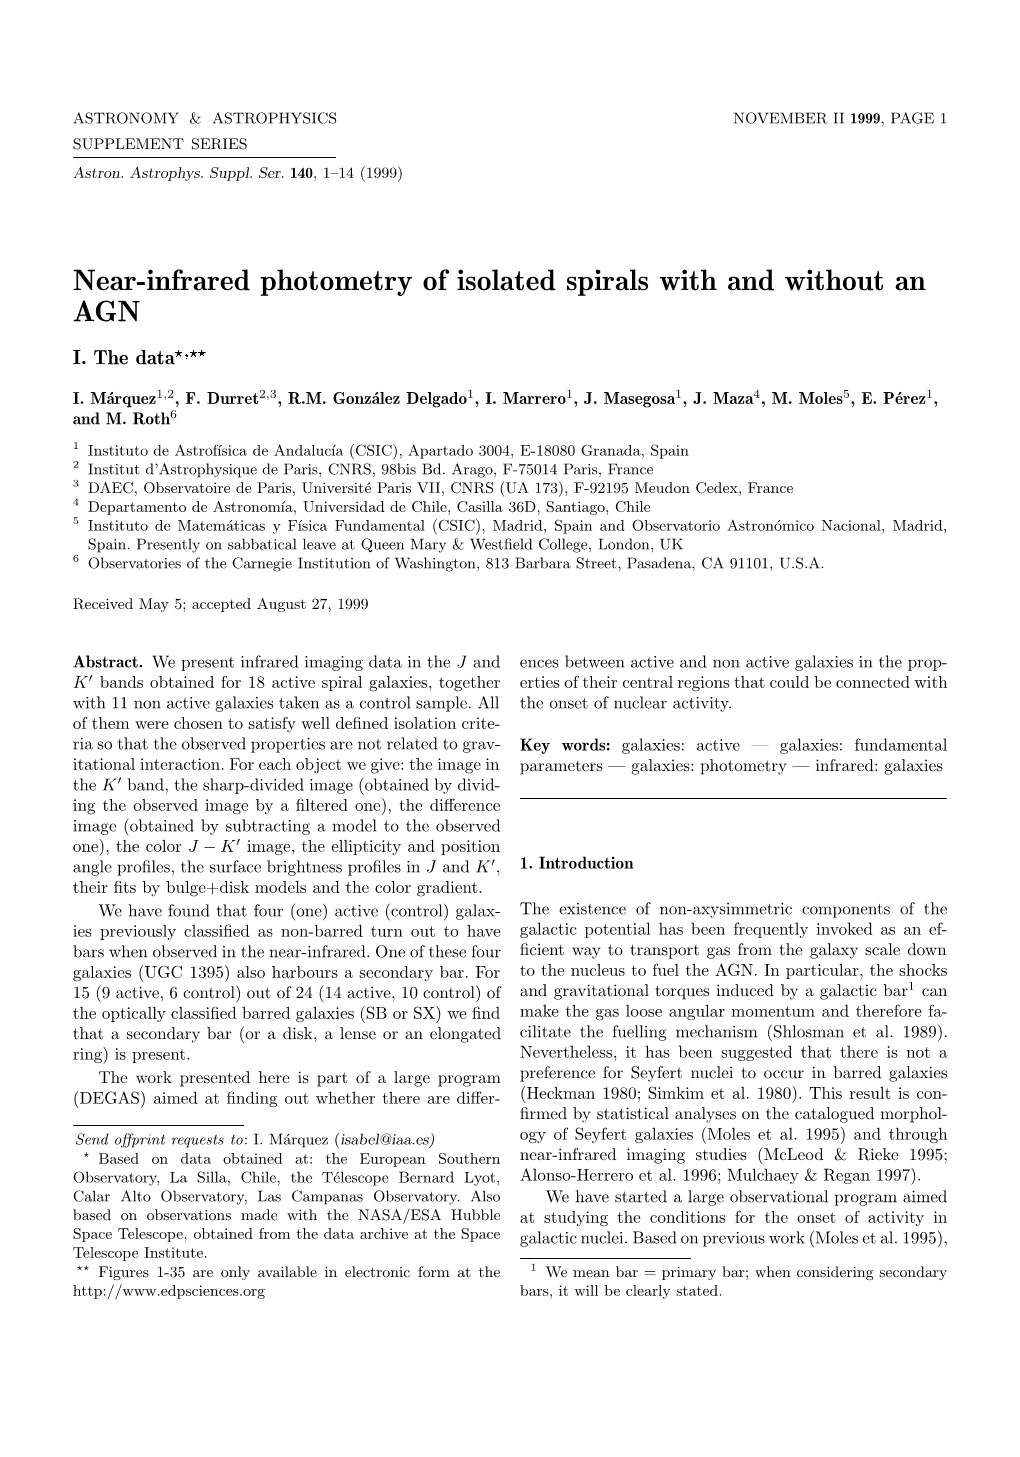 Near-Infrared Photometry of Isolated Spirals with and Without an AGN